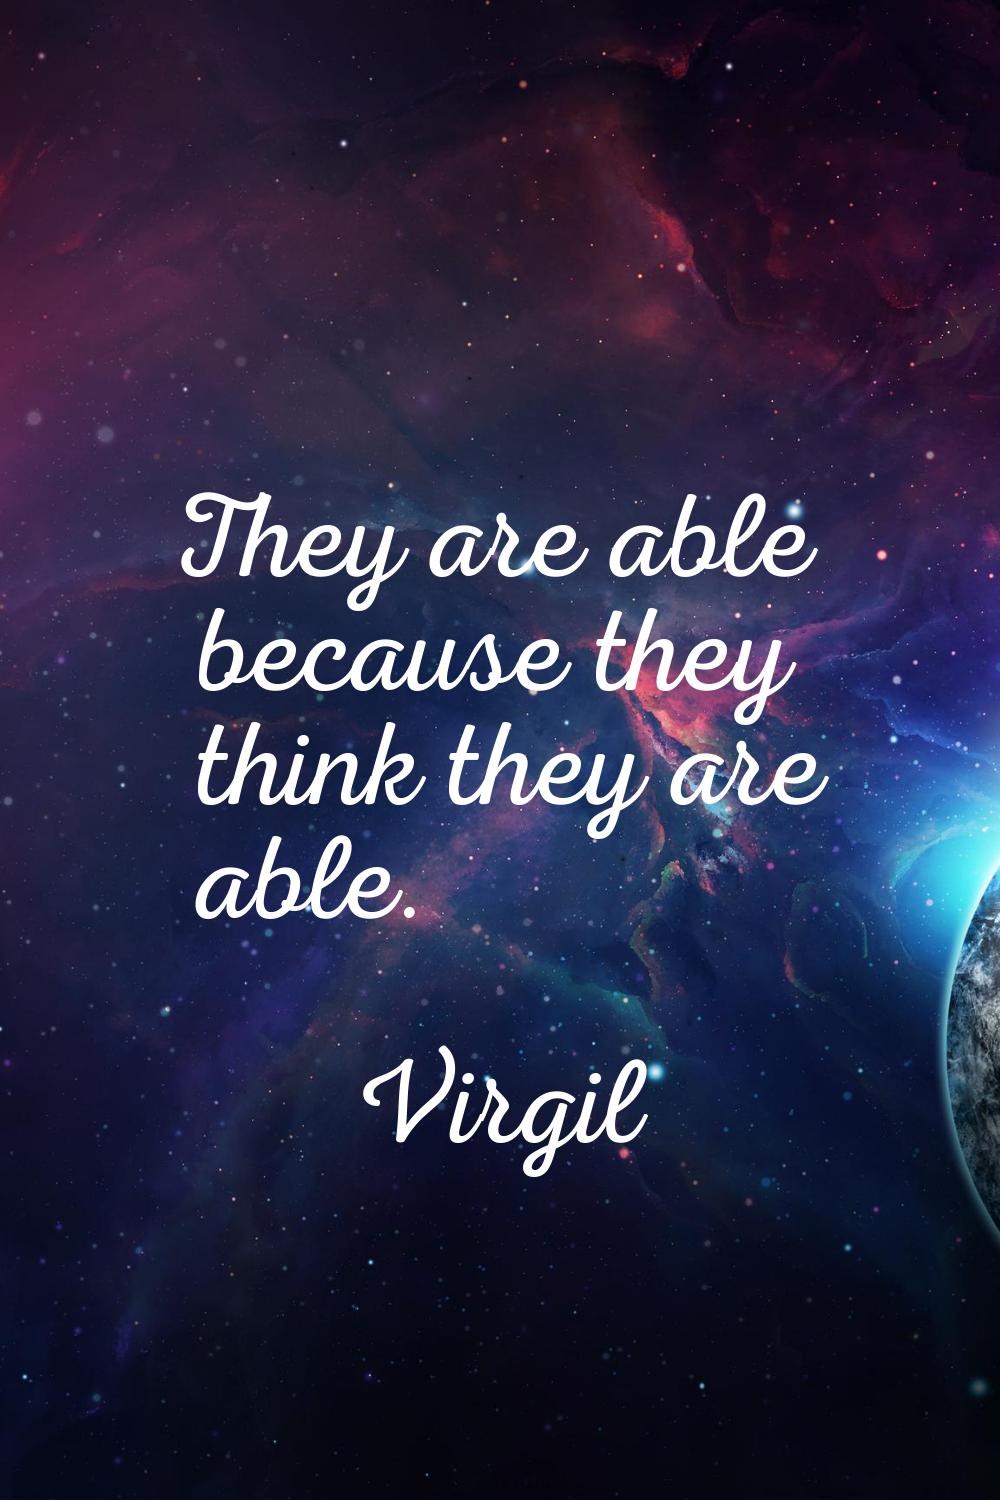 They are able because they think they are able.